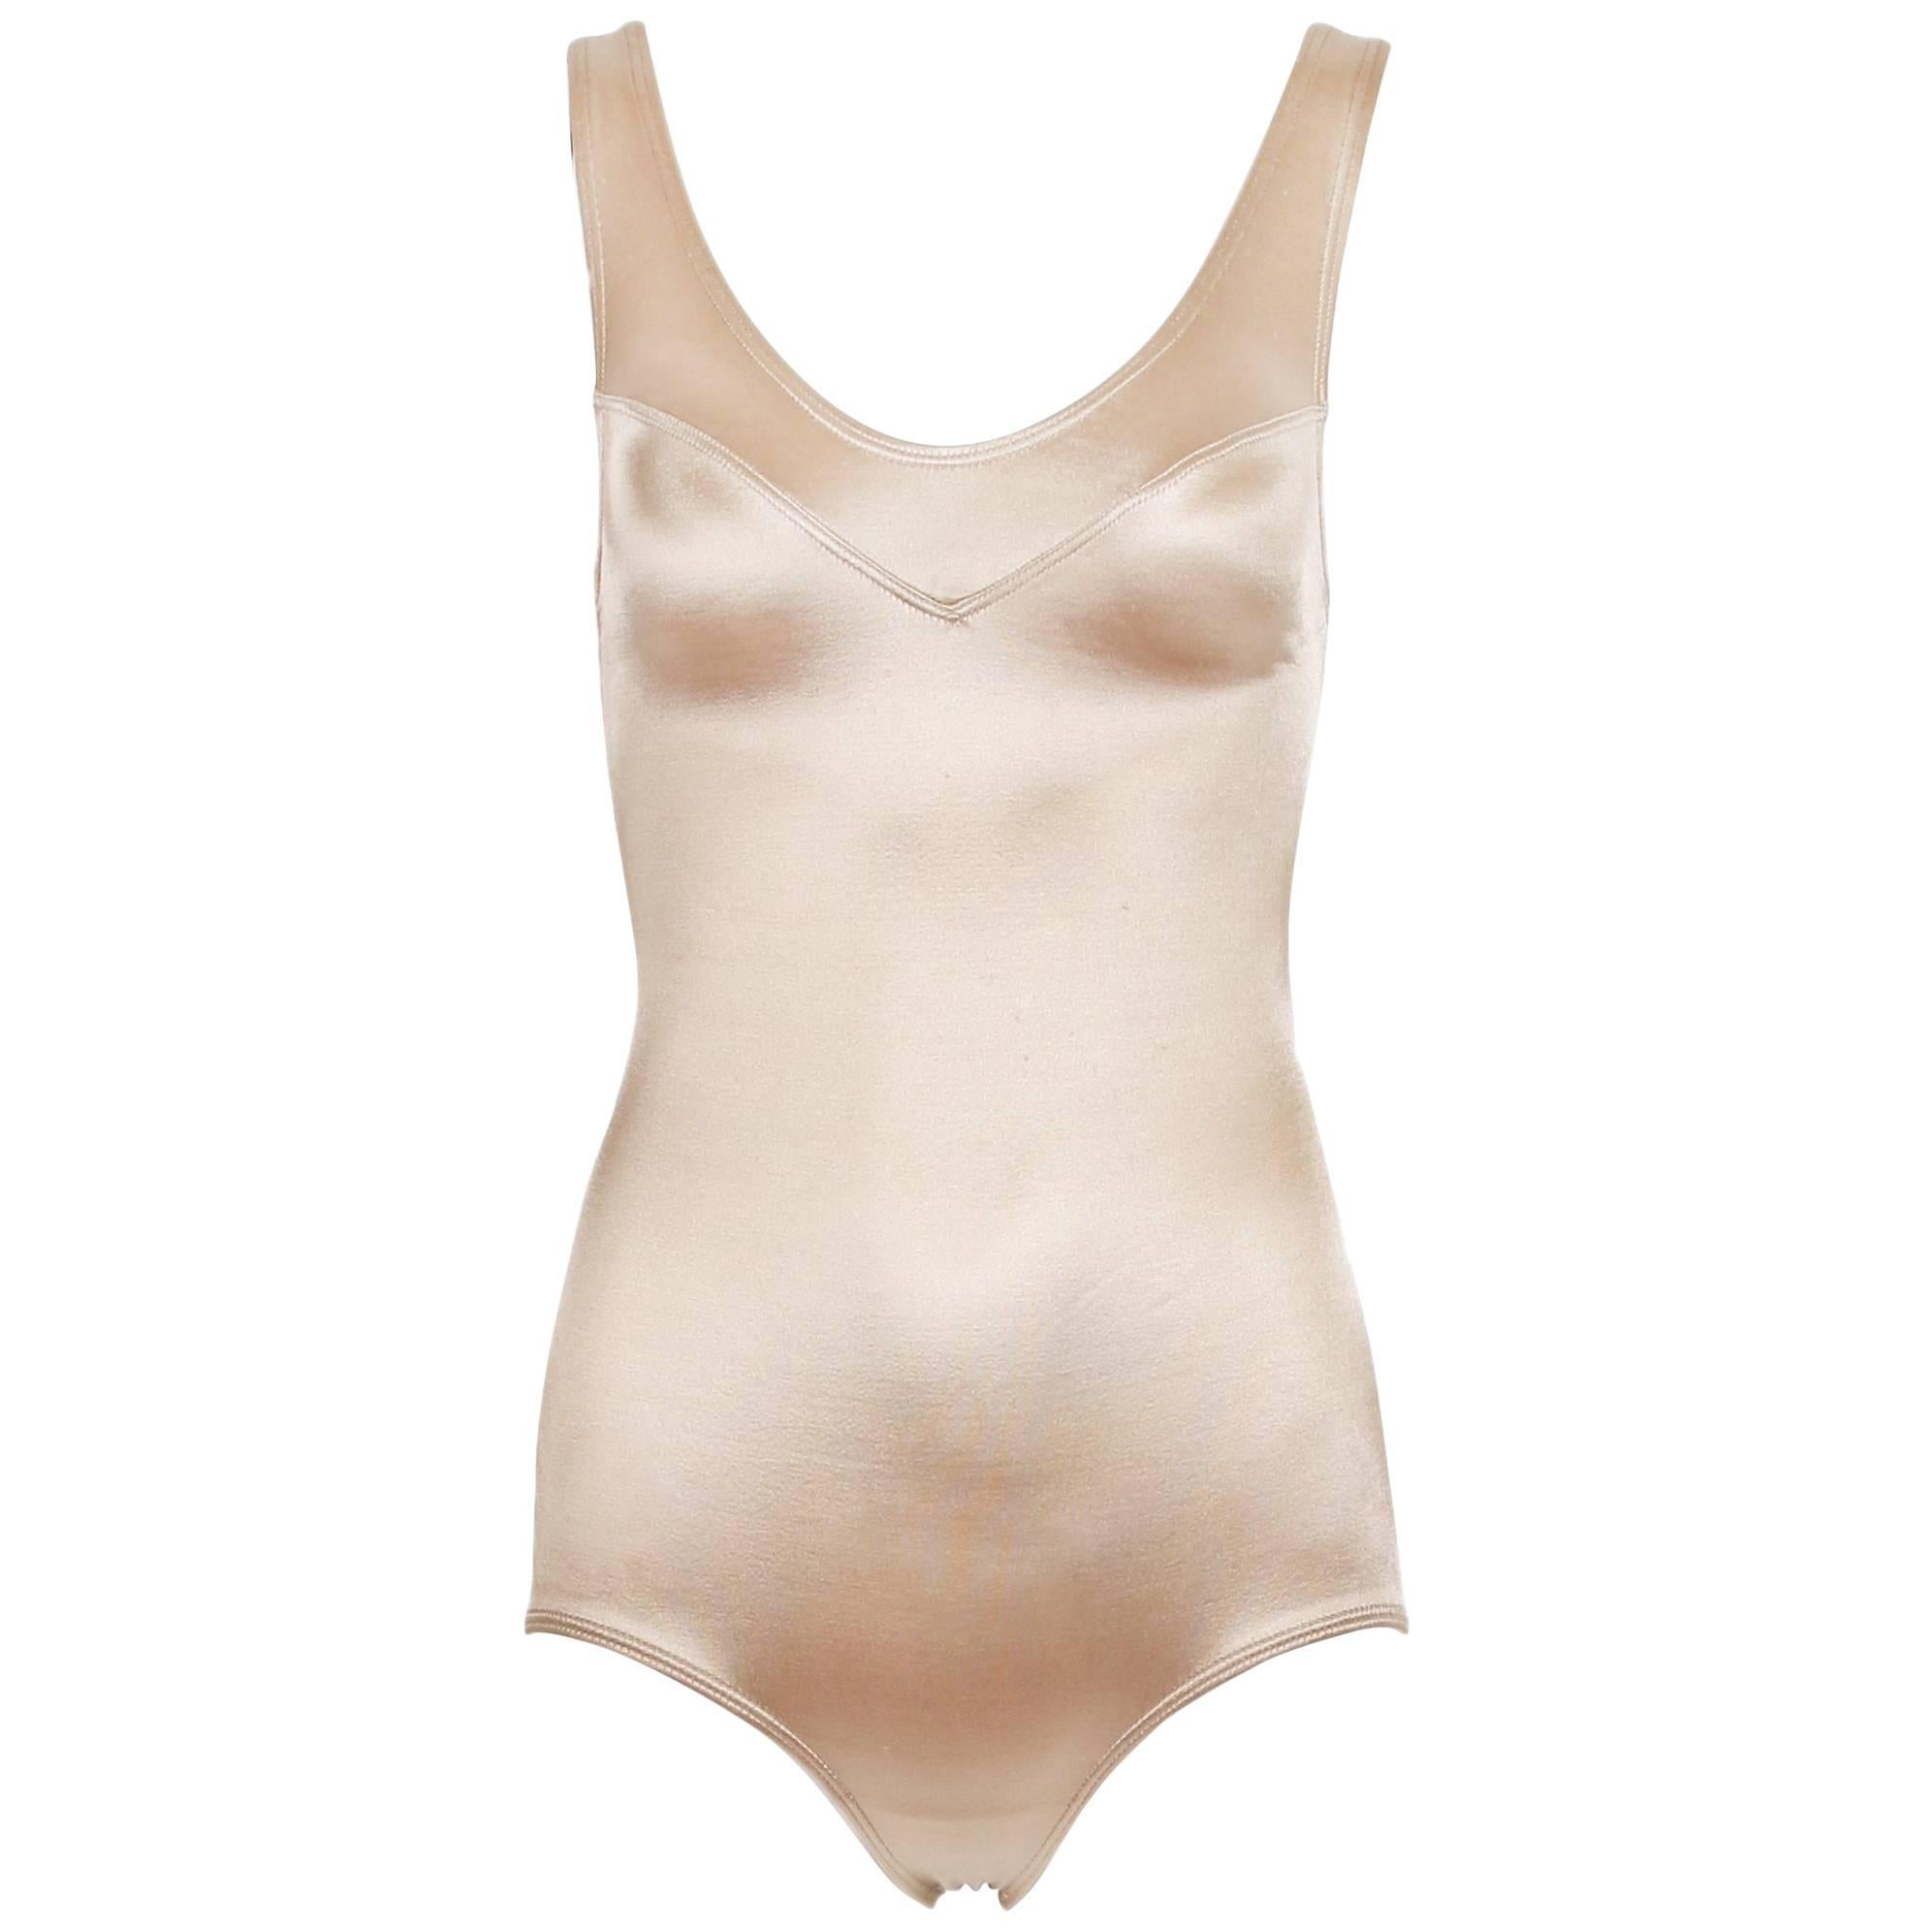 Azzedine Alaia Vintage Champagne Colored Stretch Satin Bathing Suit